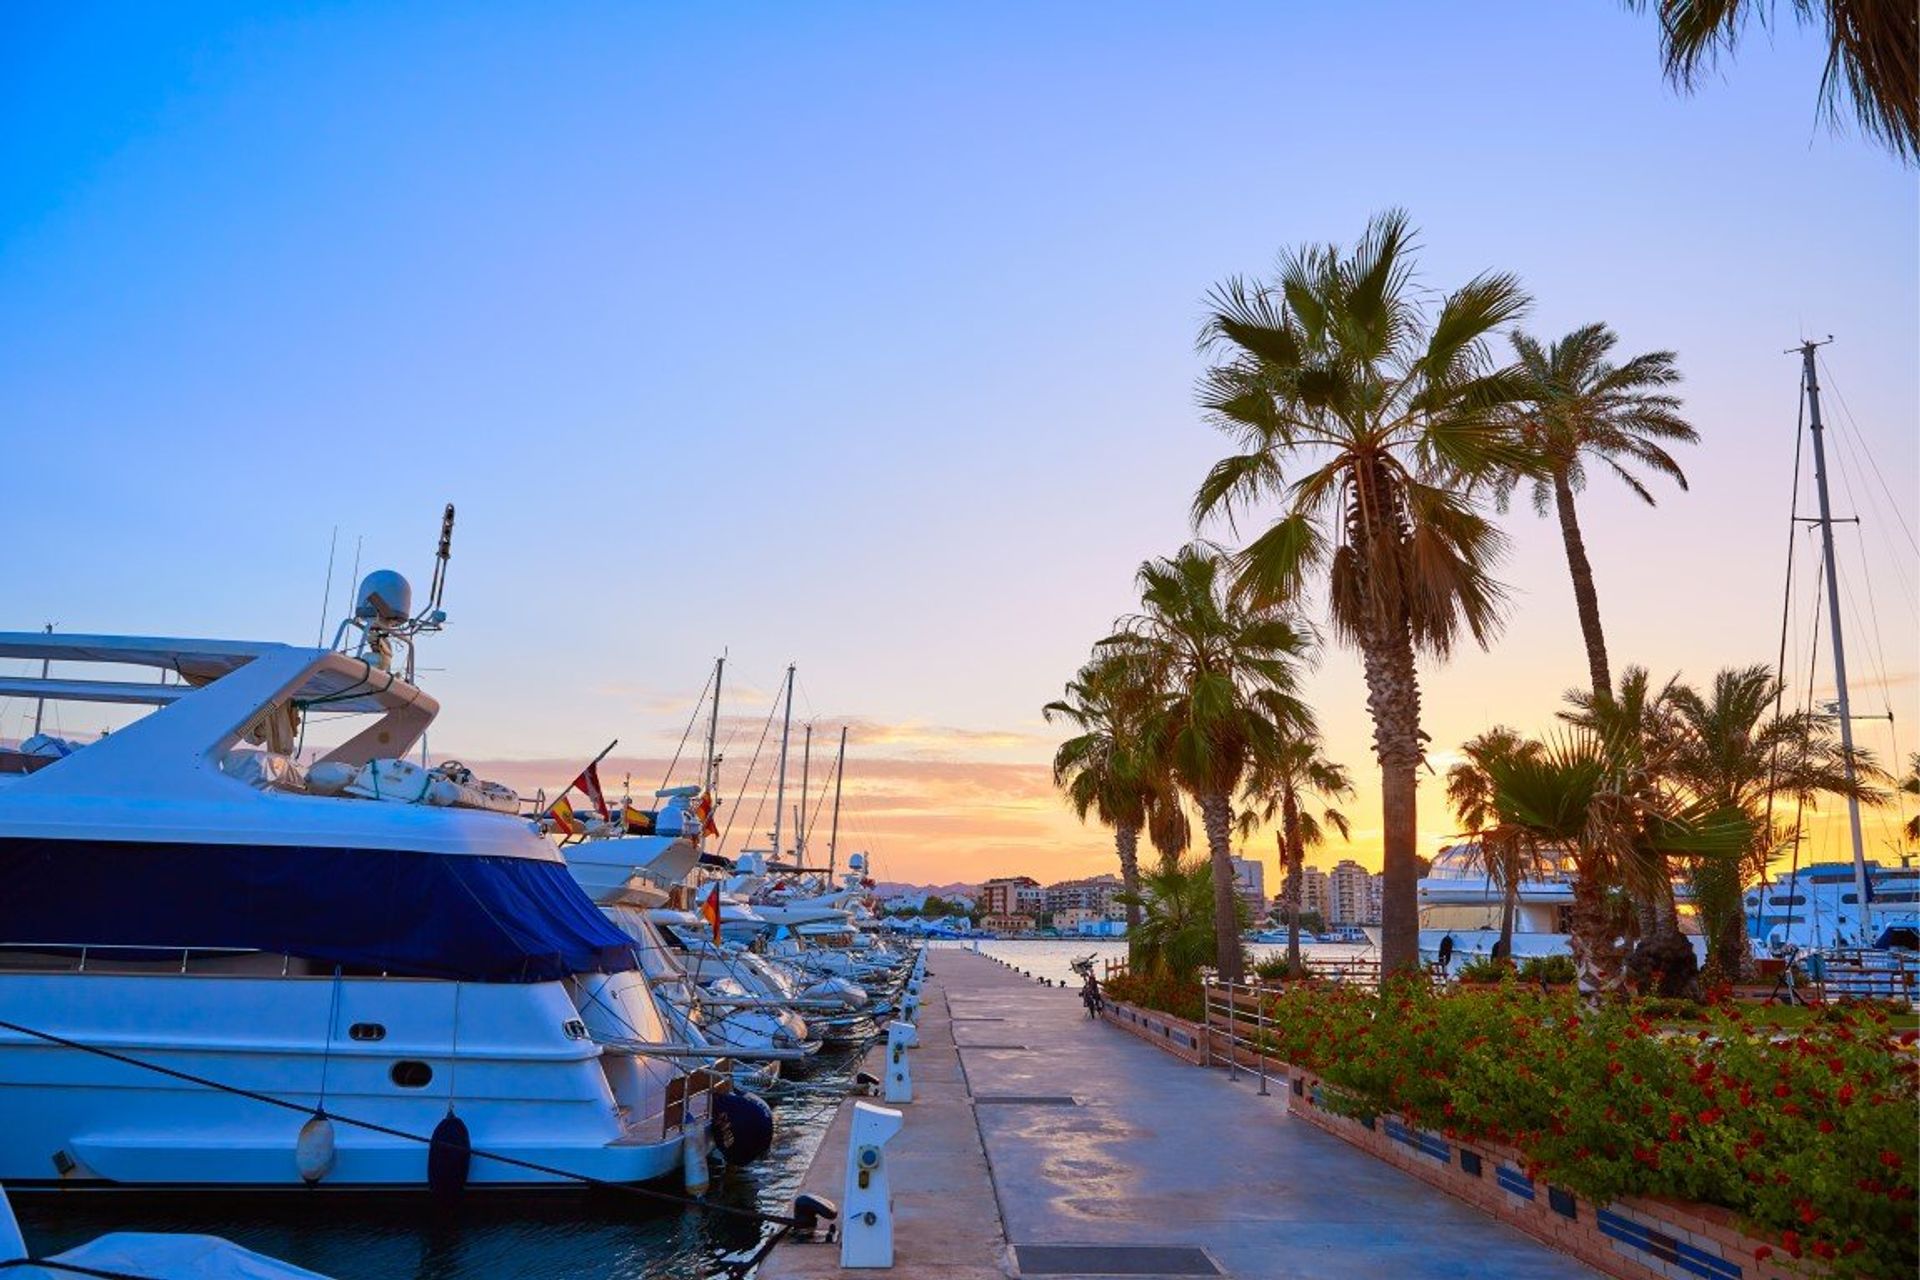 Take a stroll along the marina at night and feel the authentic atmosphere of a typical Mediterranean coastal town